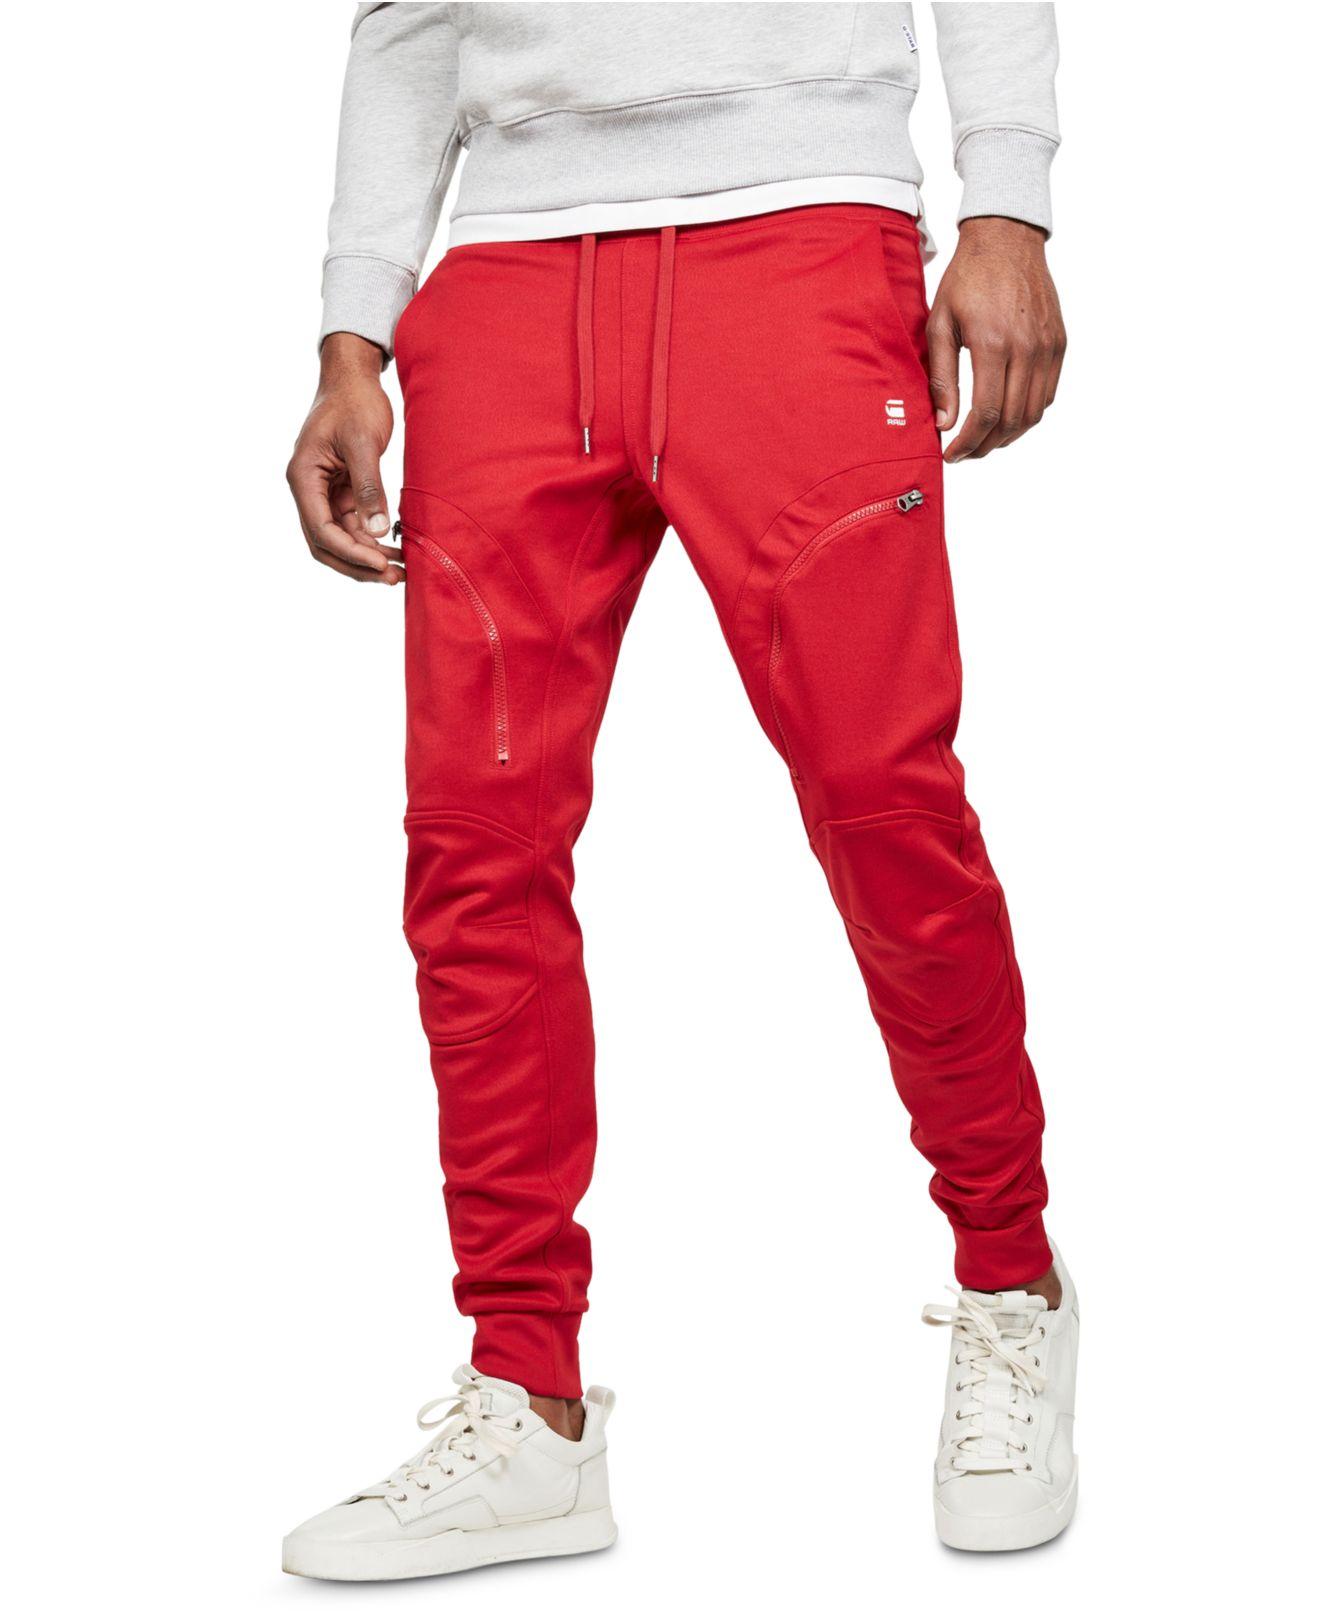 G-Star RAW Air Defense Slim-fit Moto Joggers, Created For Macy's in Red ...